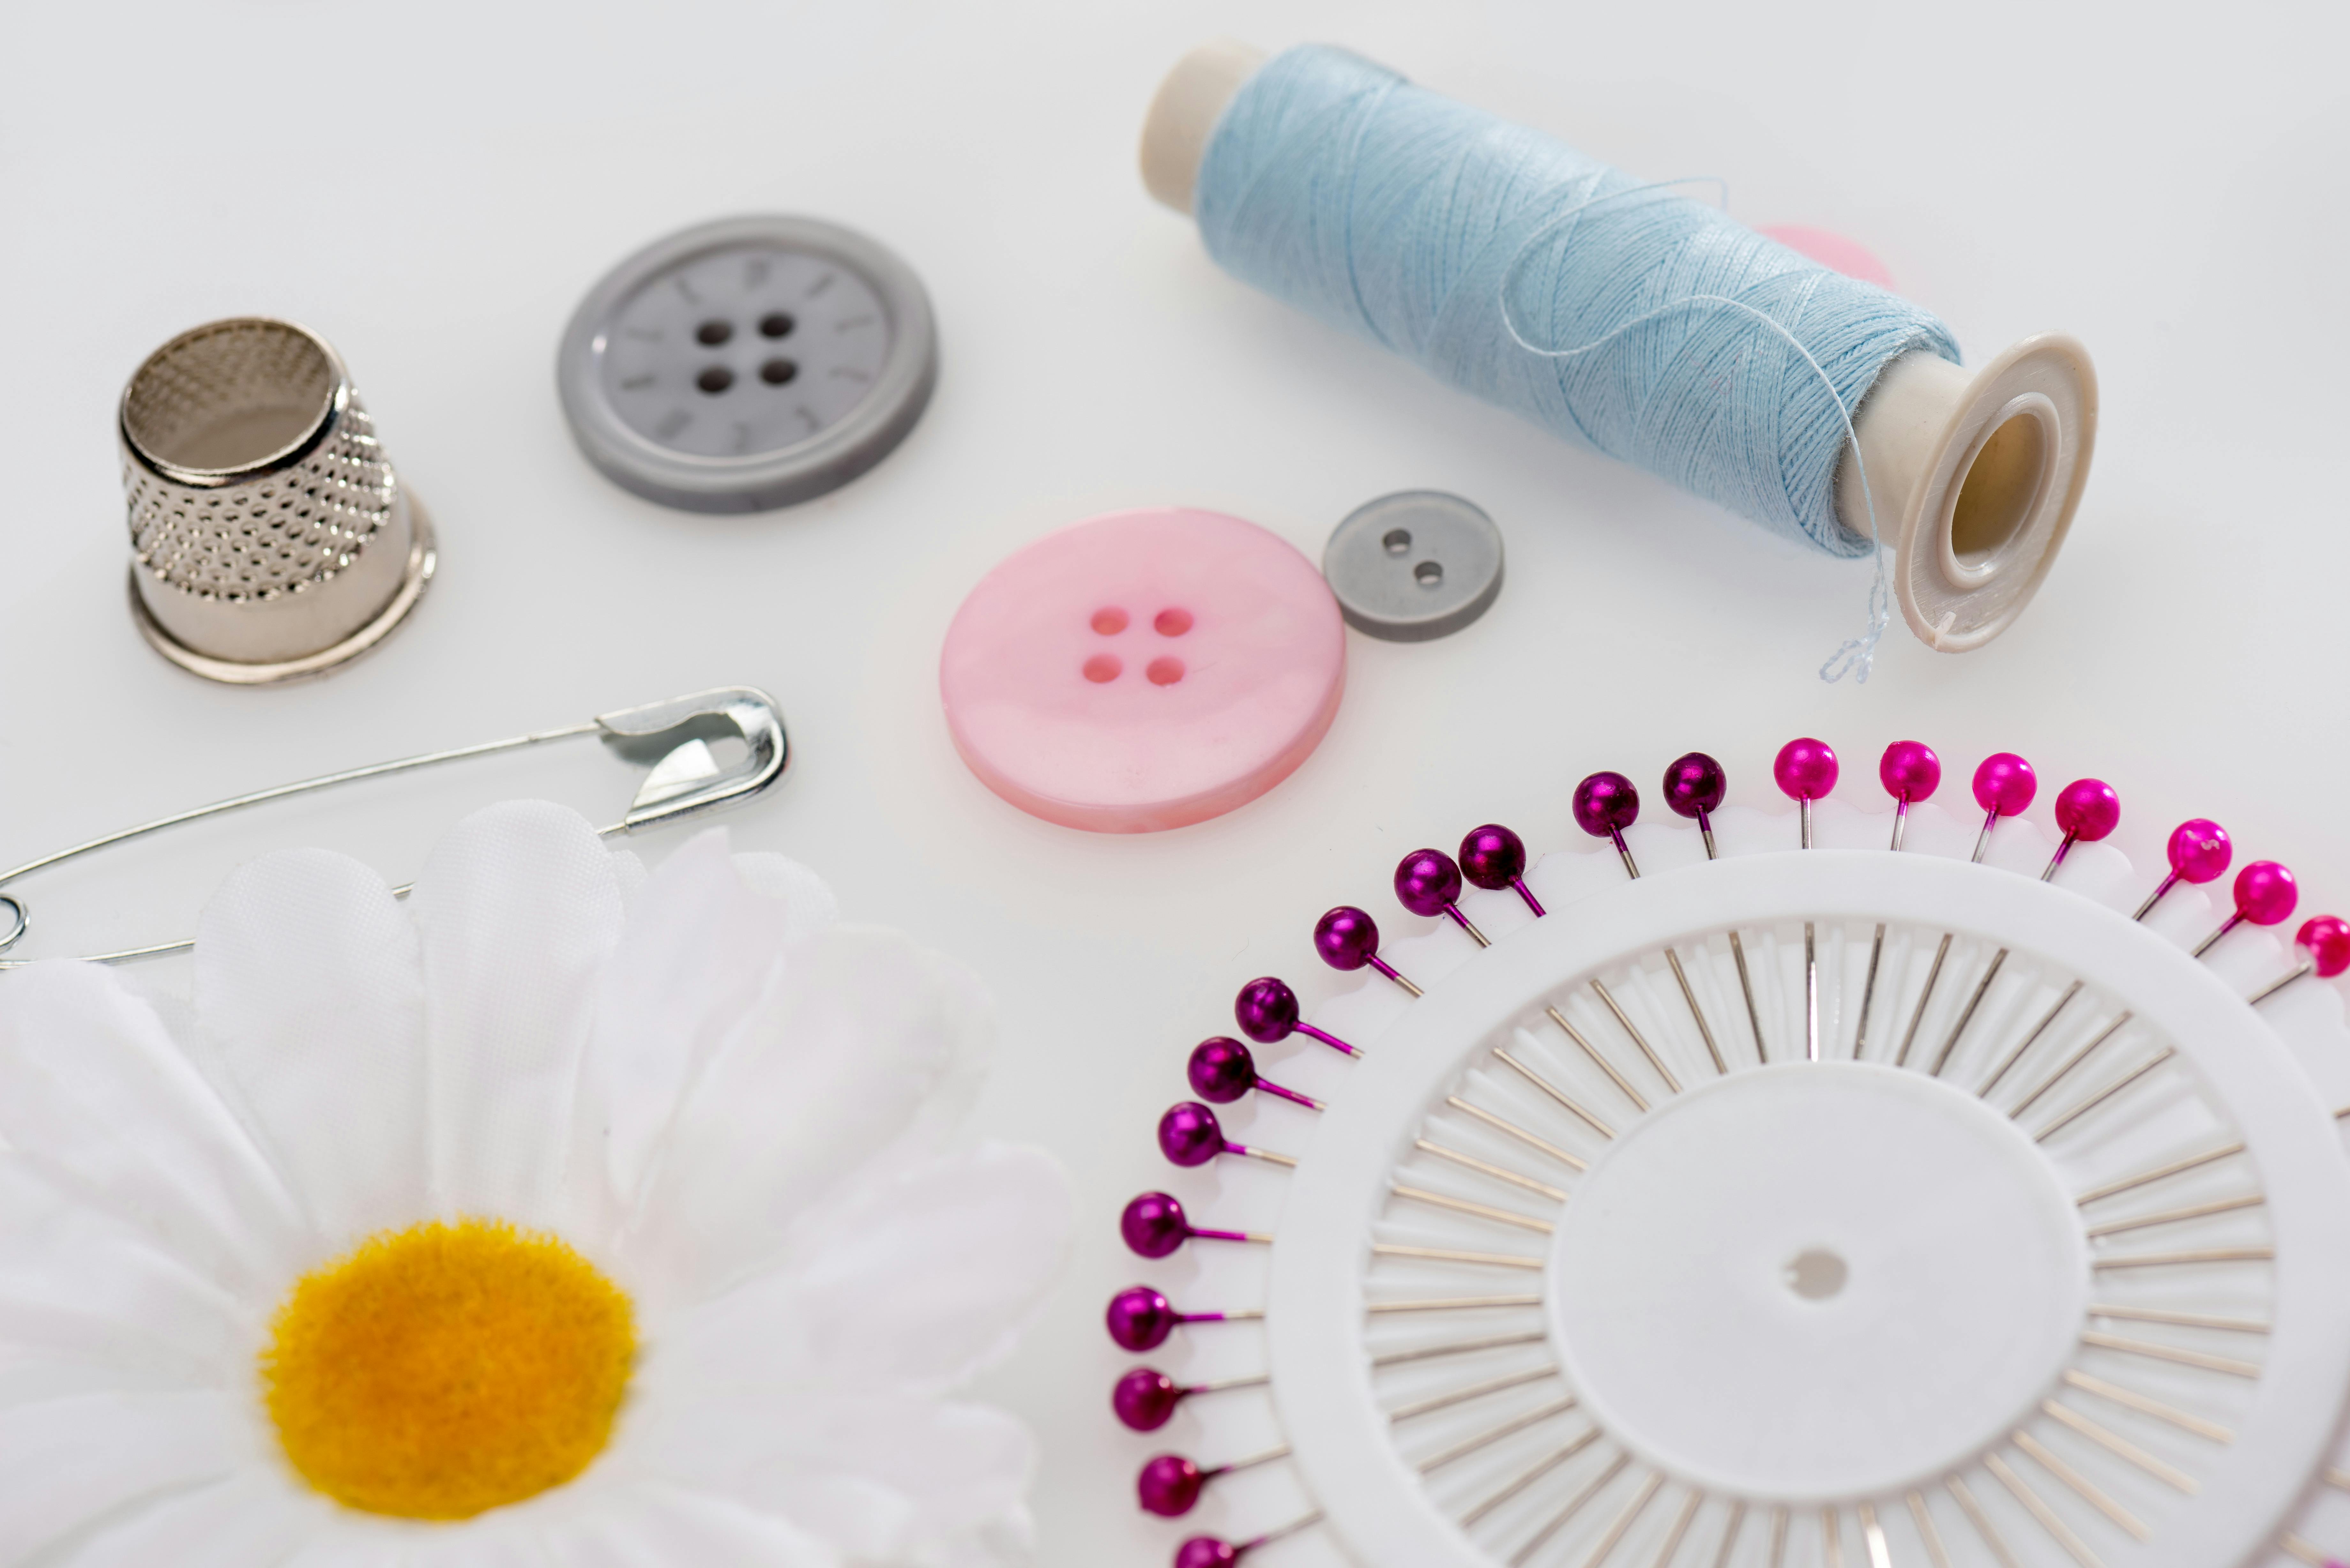  close up photo of sewing notions like pins, buttons and thread